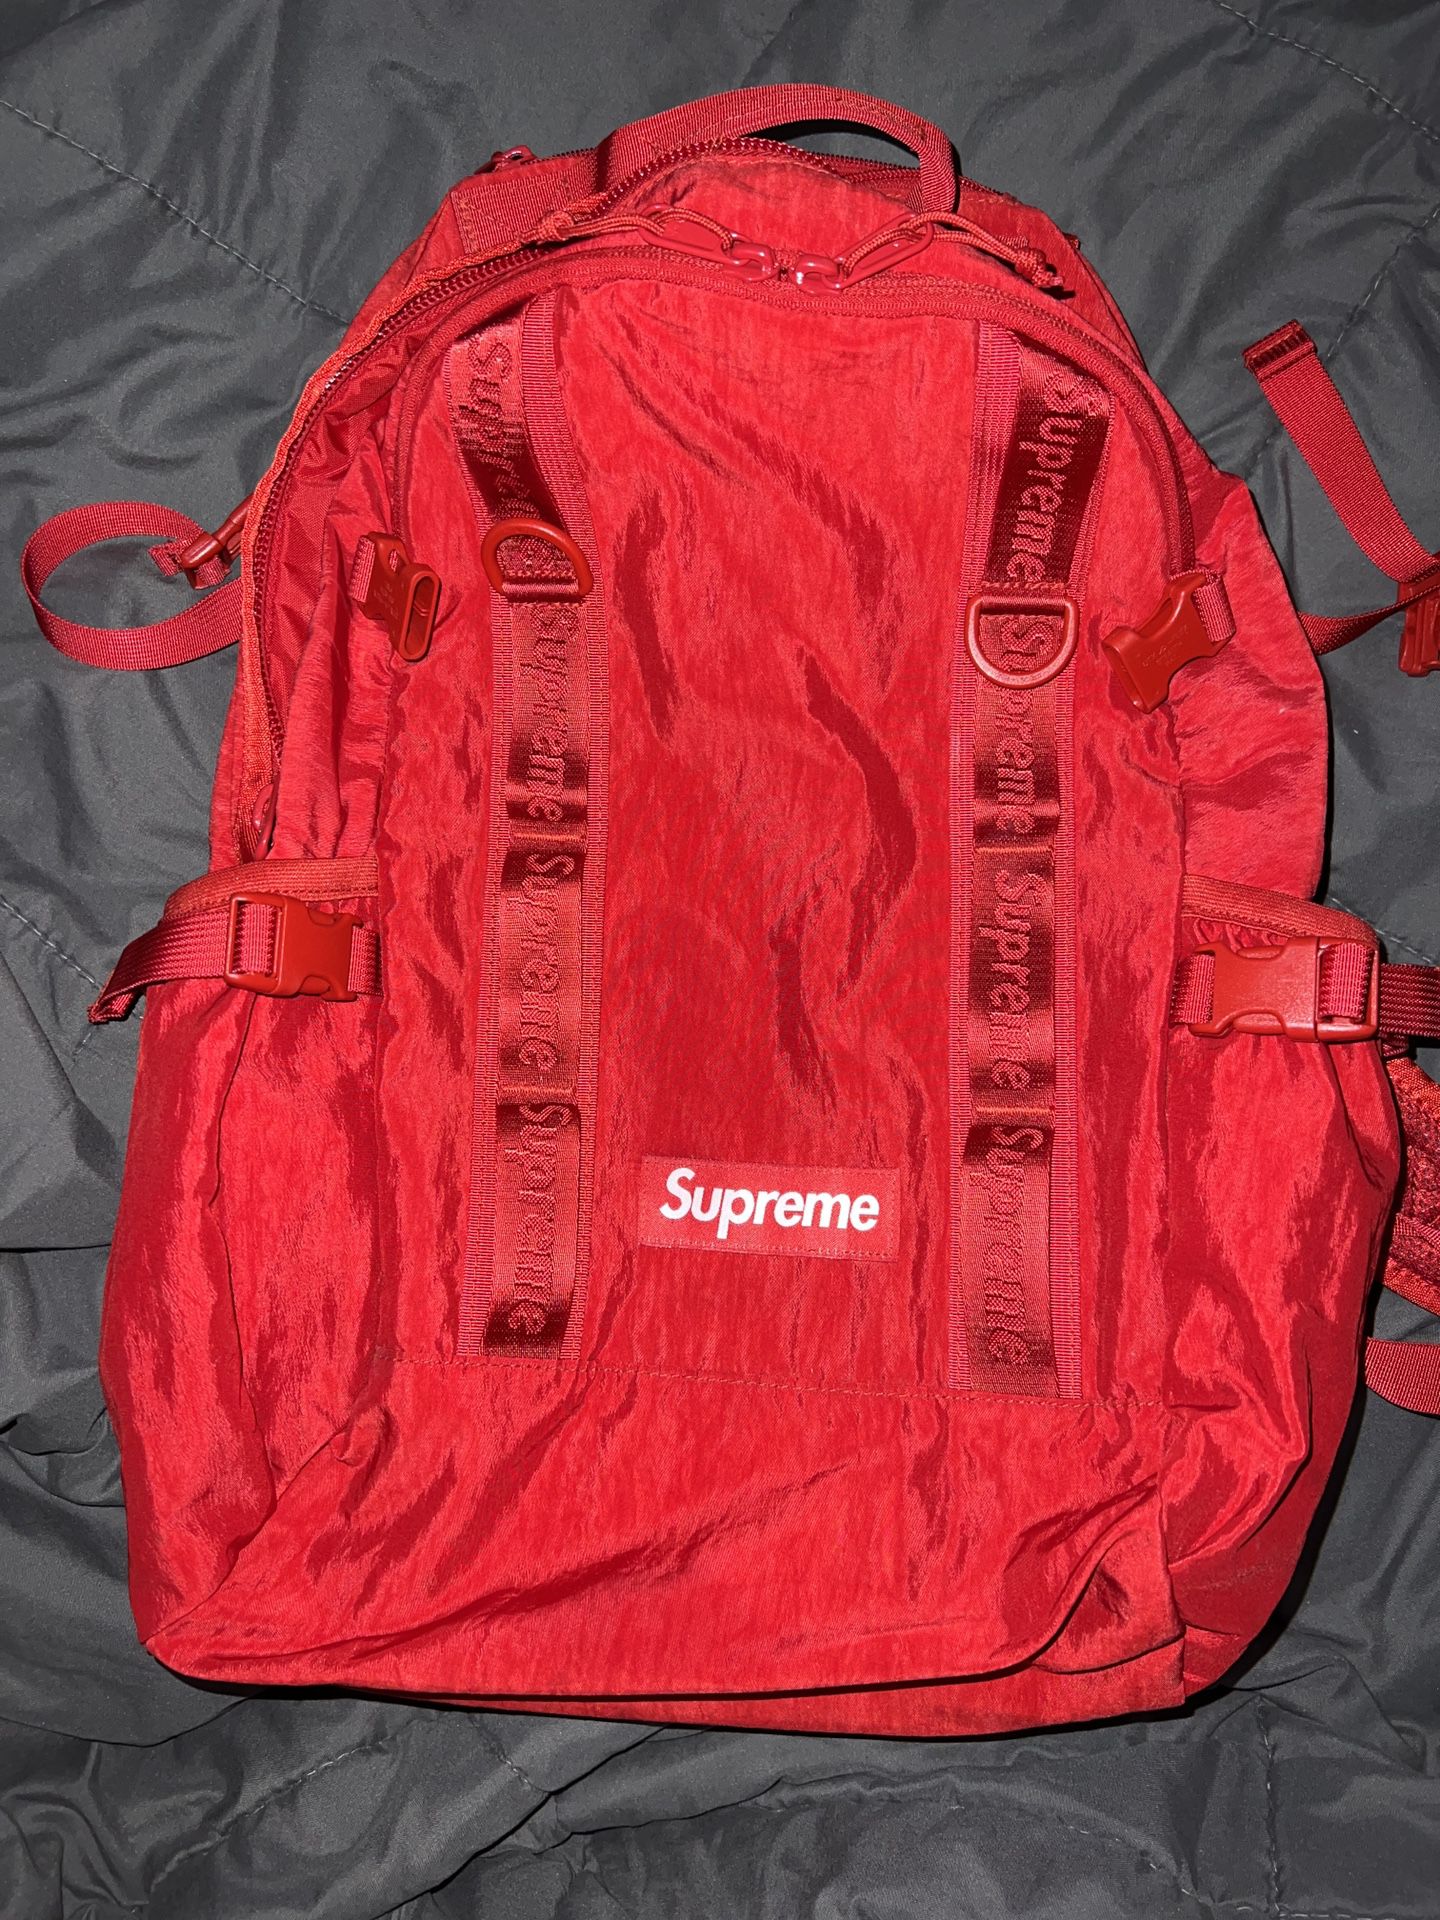 Supreme Backpack (FW20) Dark Red for Women